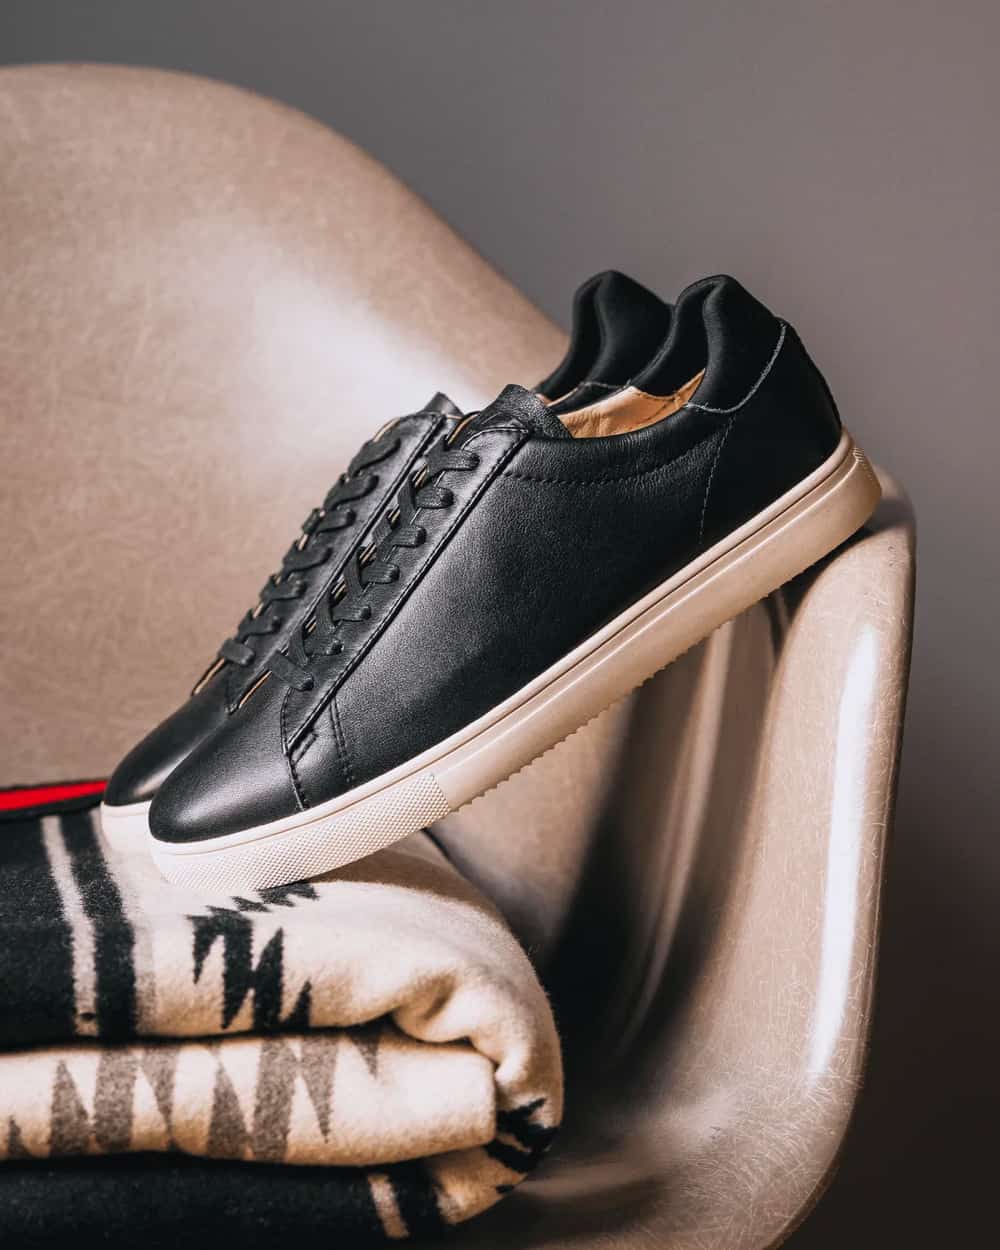 A pair of black grain leather CLAE sneakers with white sole on leather chair